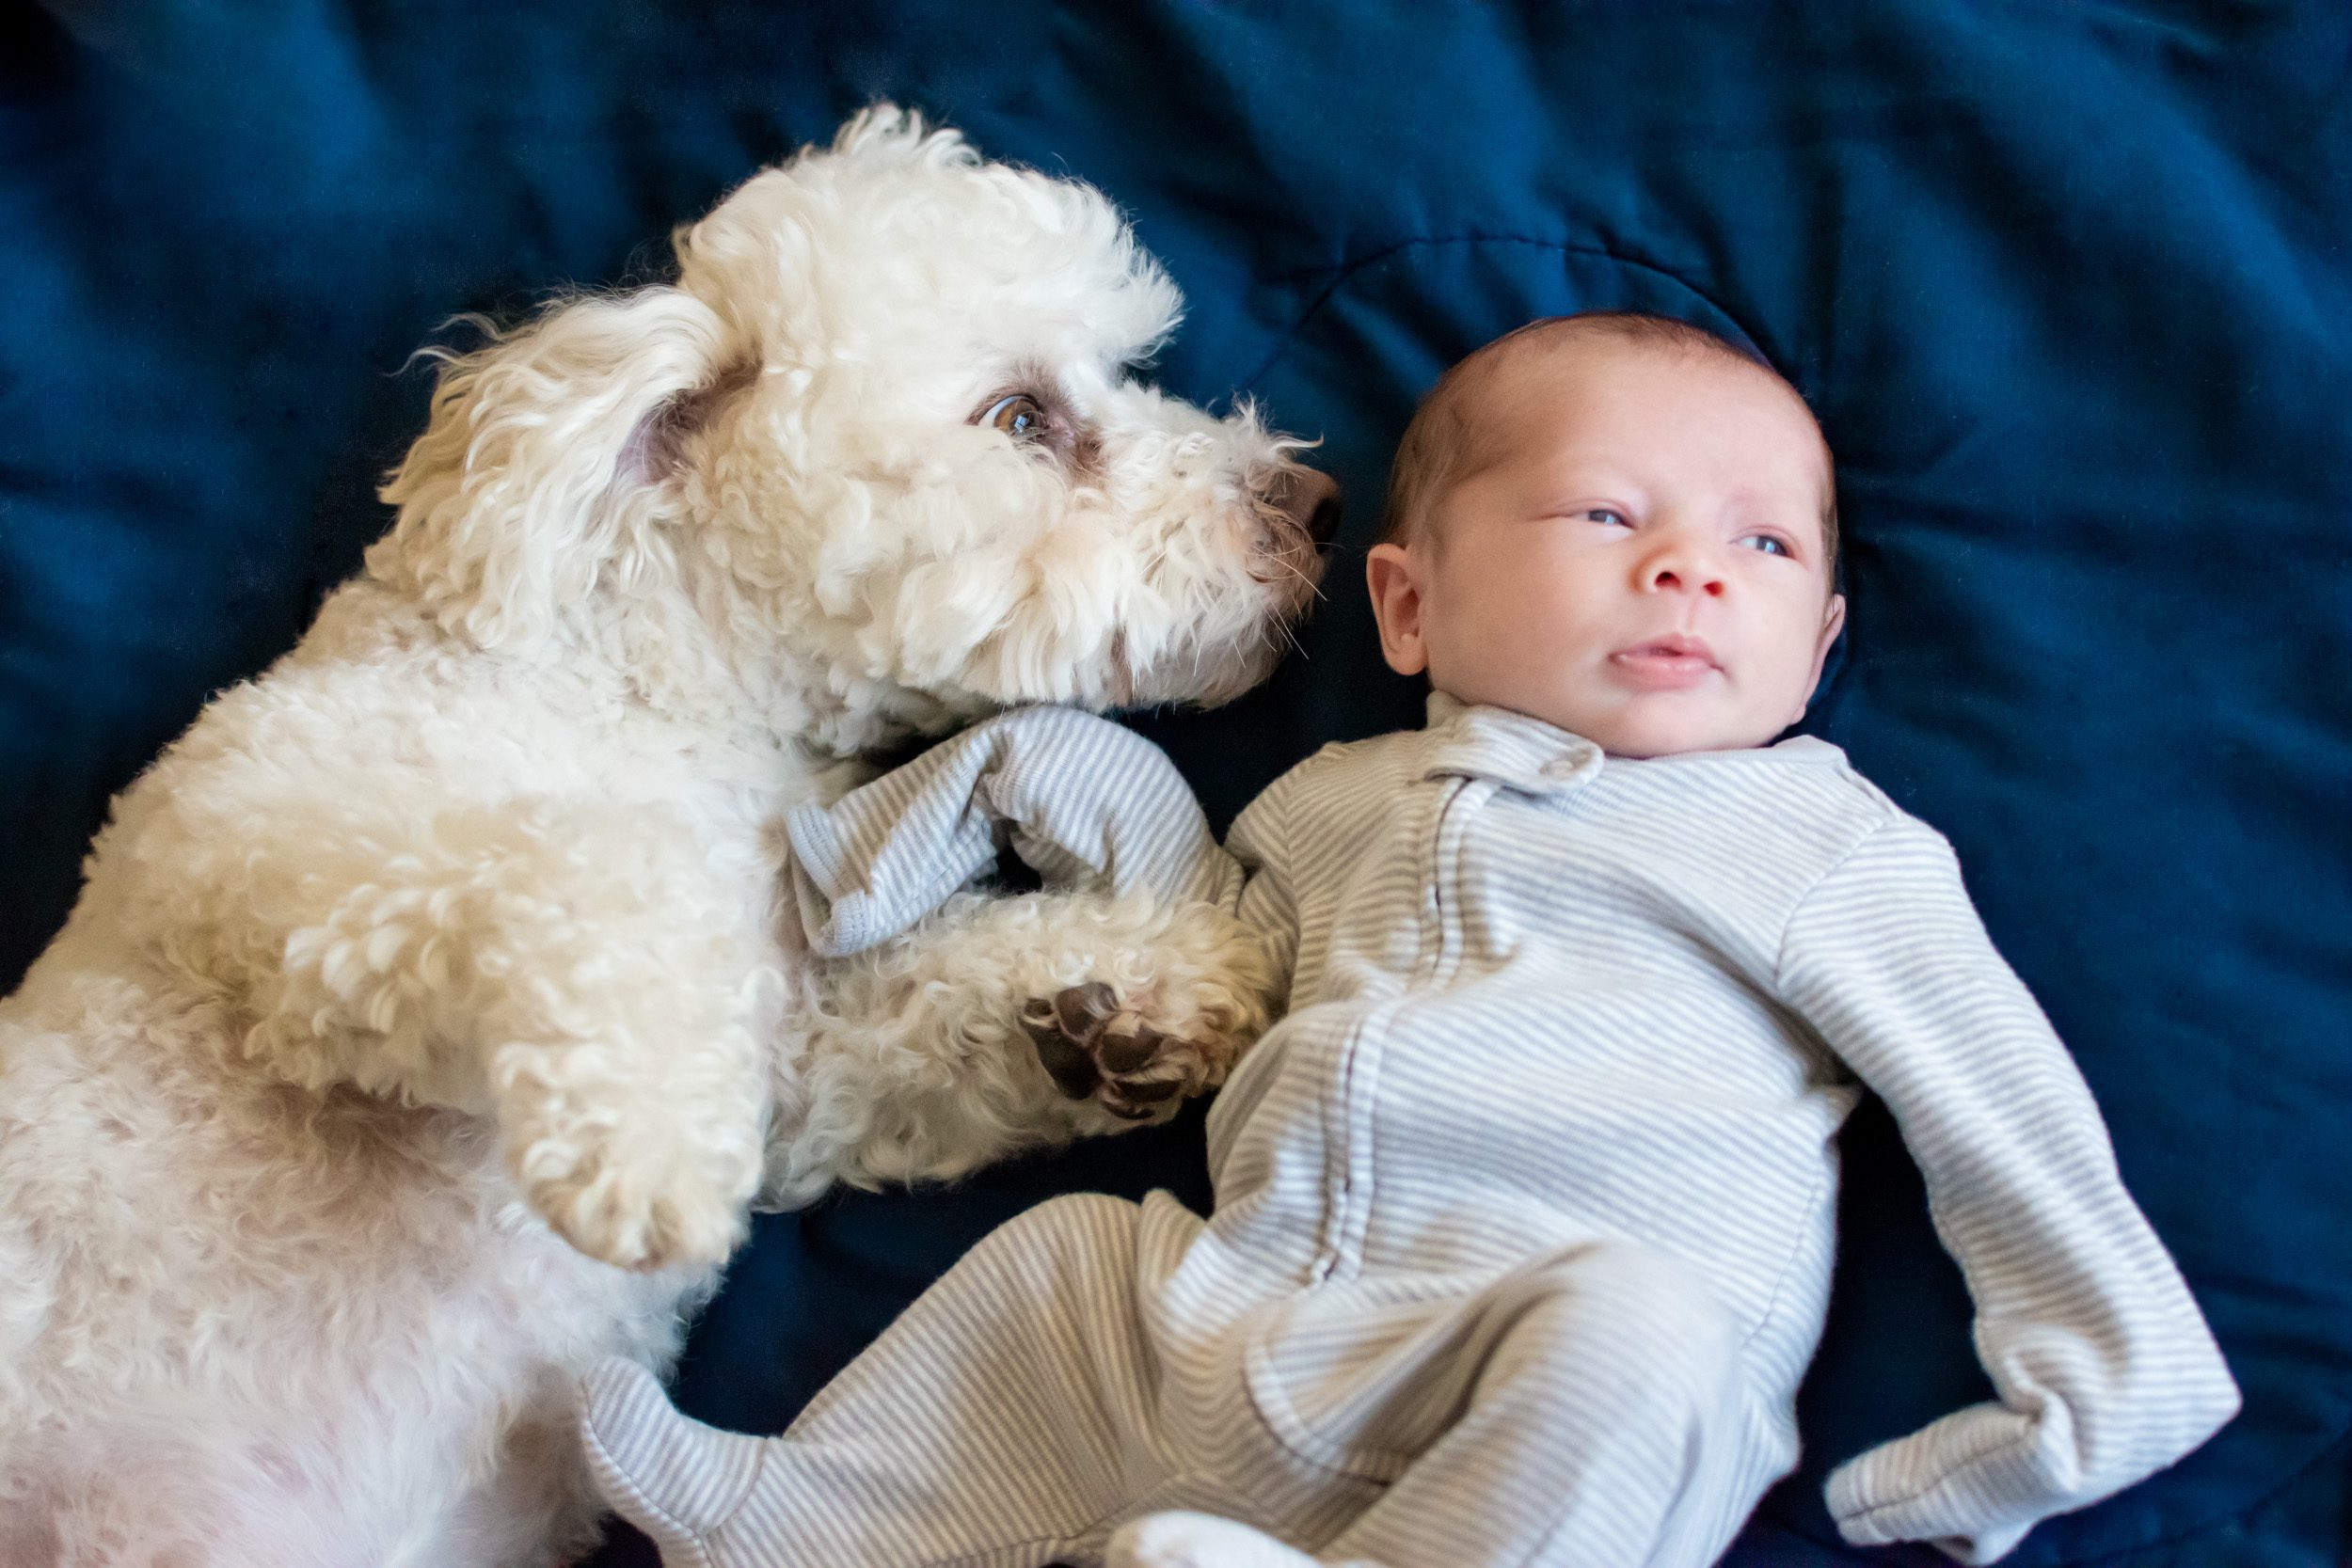 newborn boy laying on a bed while his pet dog sniffs him during a natural newborn photo session